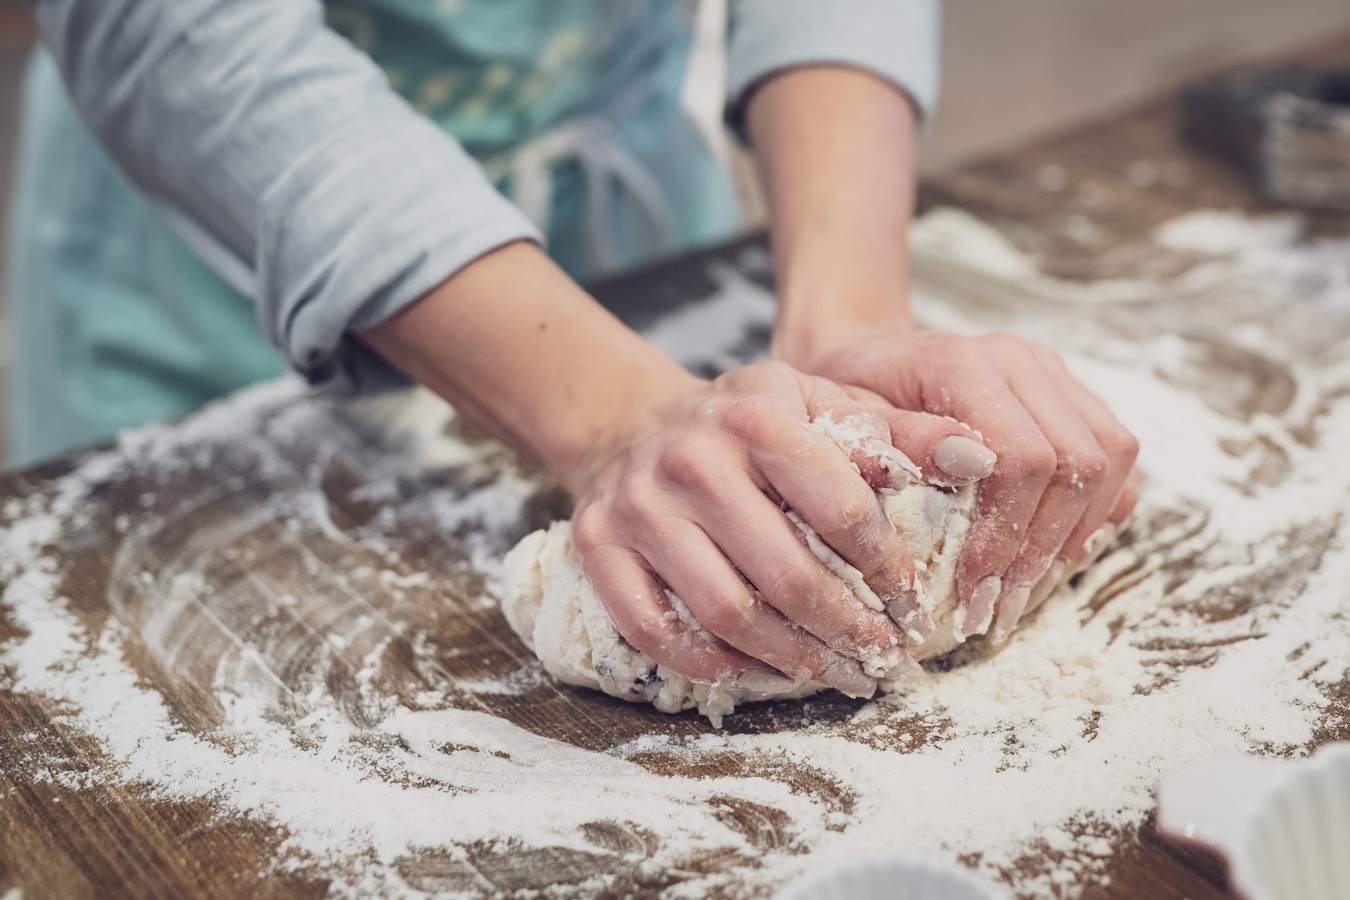 A woman holding dough on a cutting board